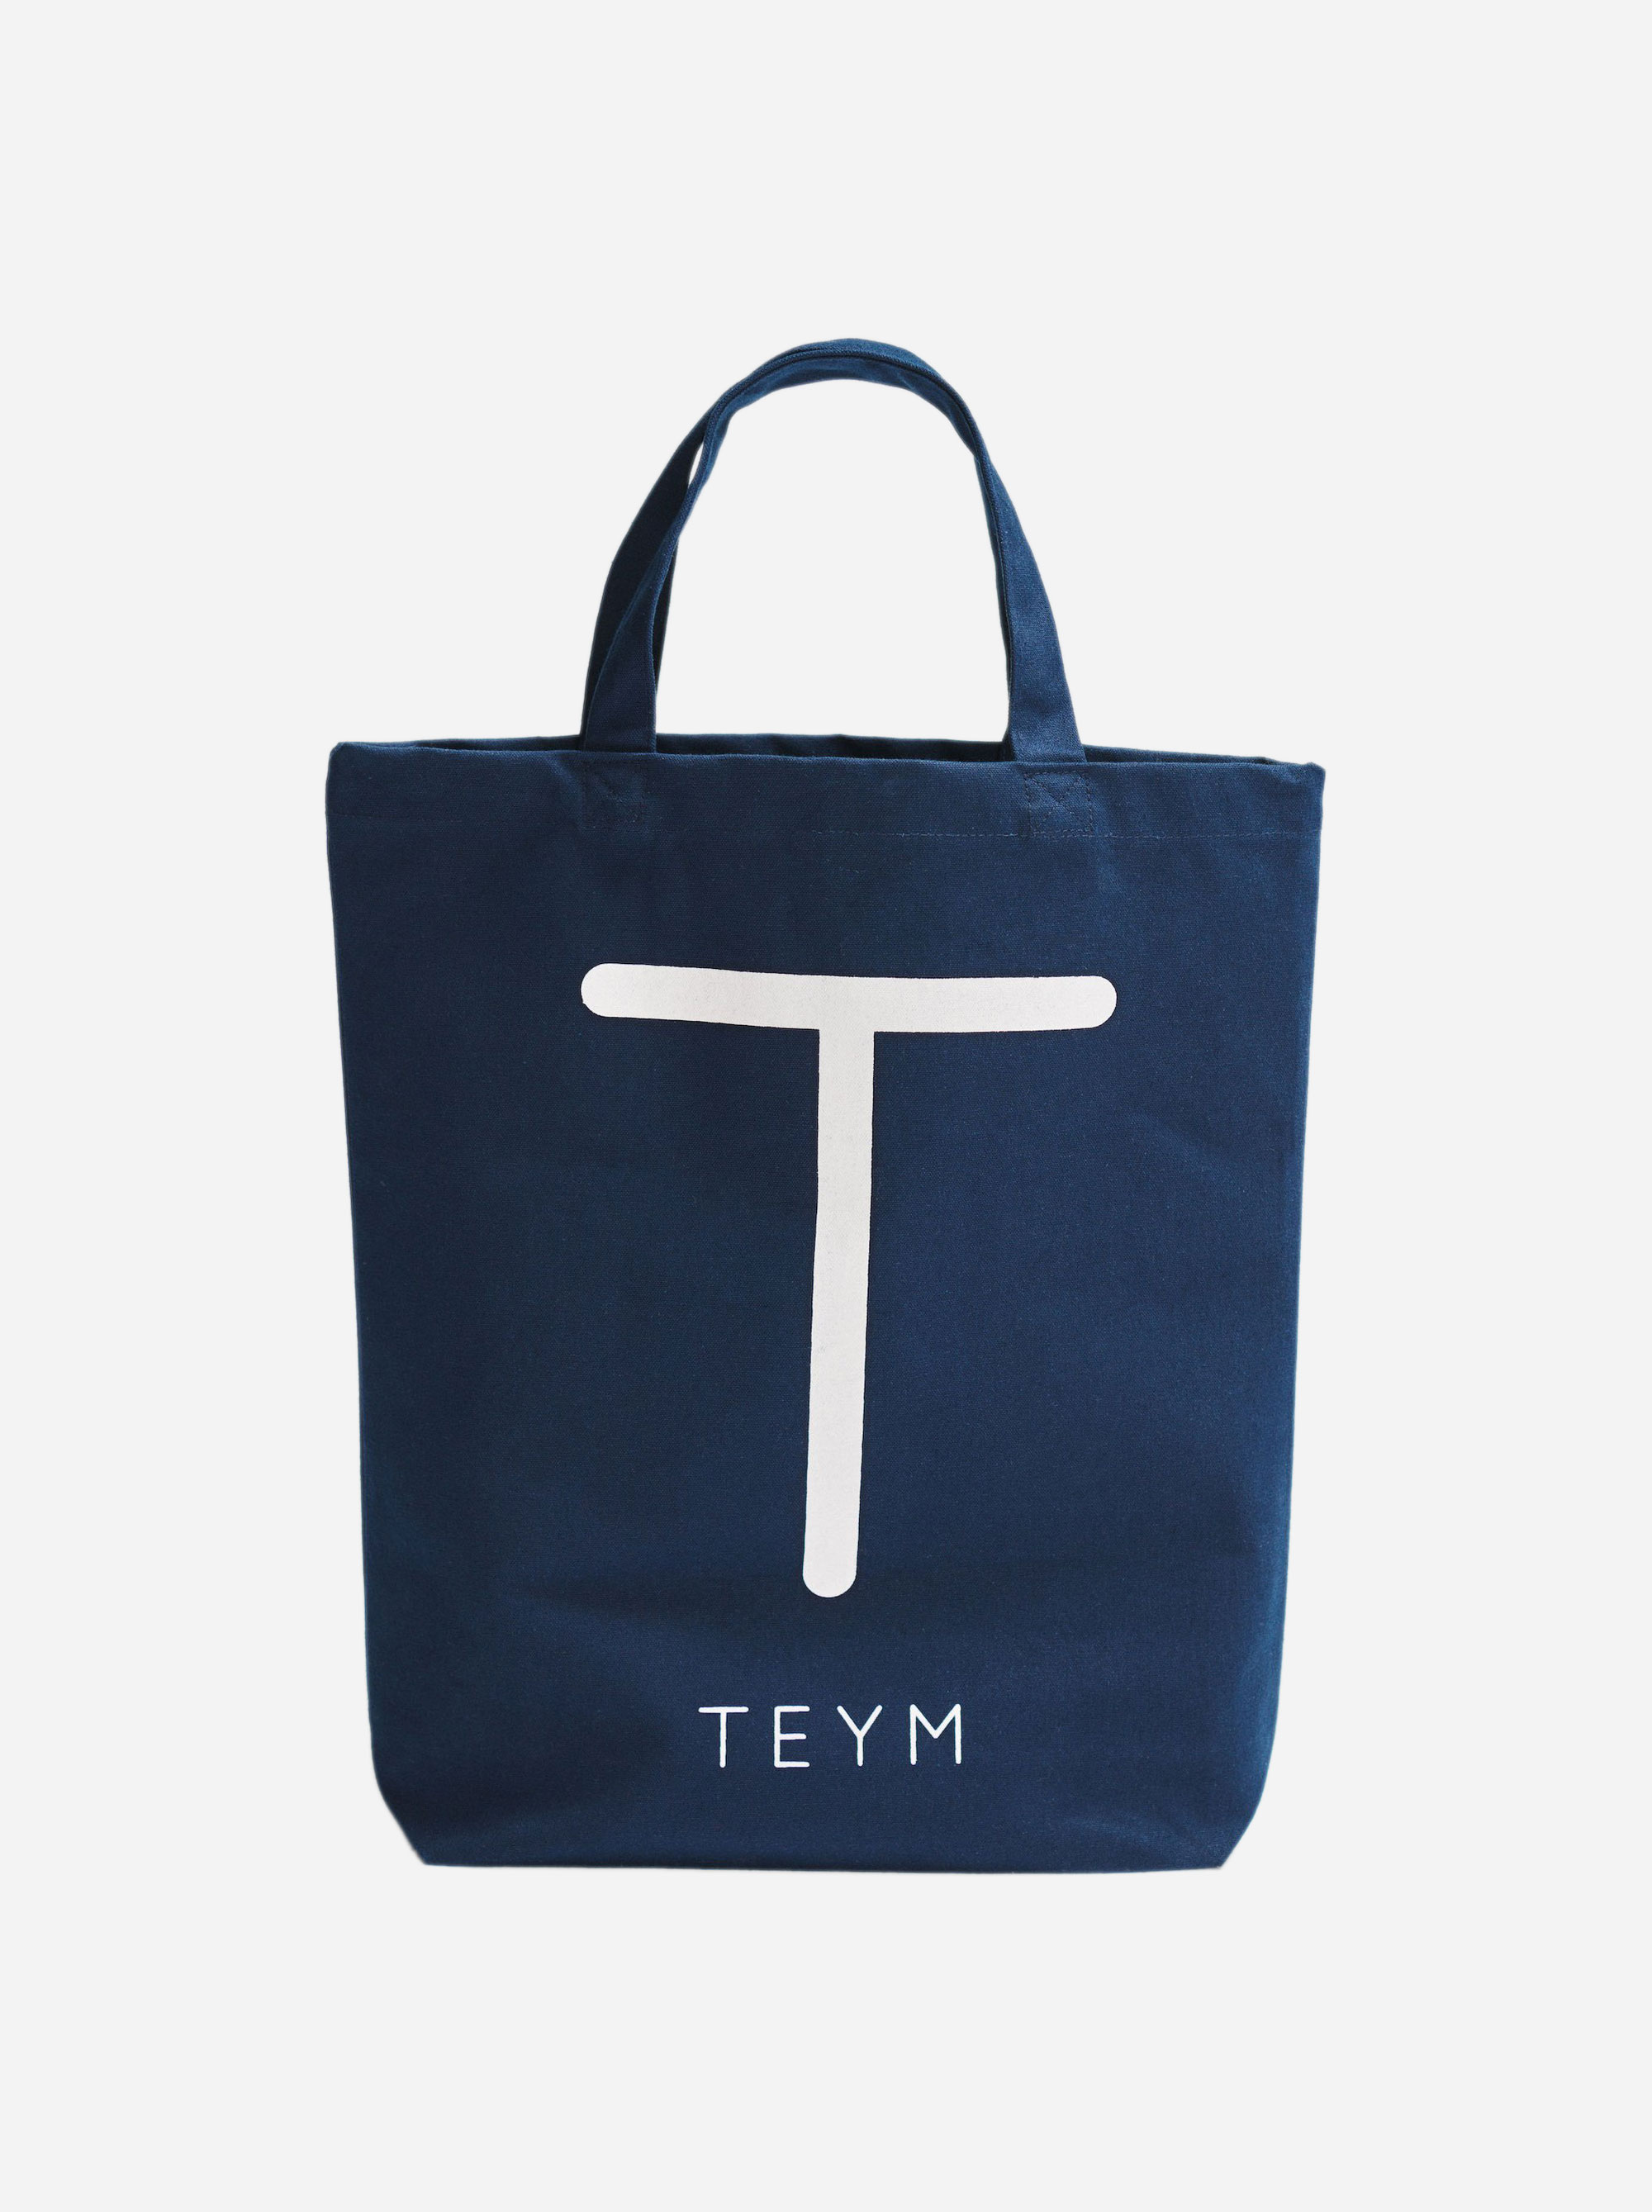 Teym - The Canvas Tote - 1